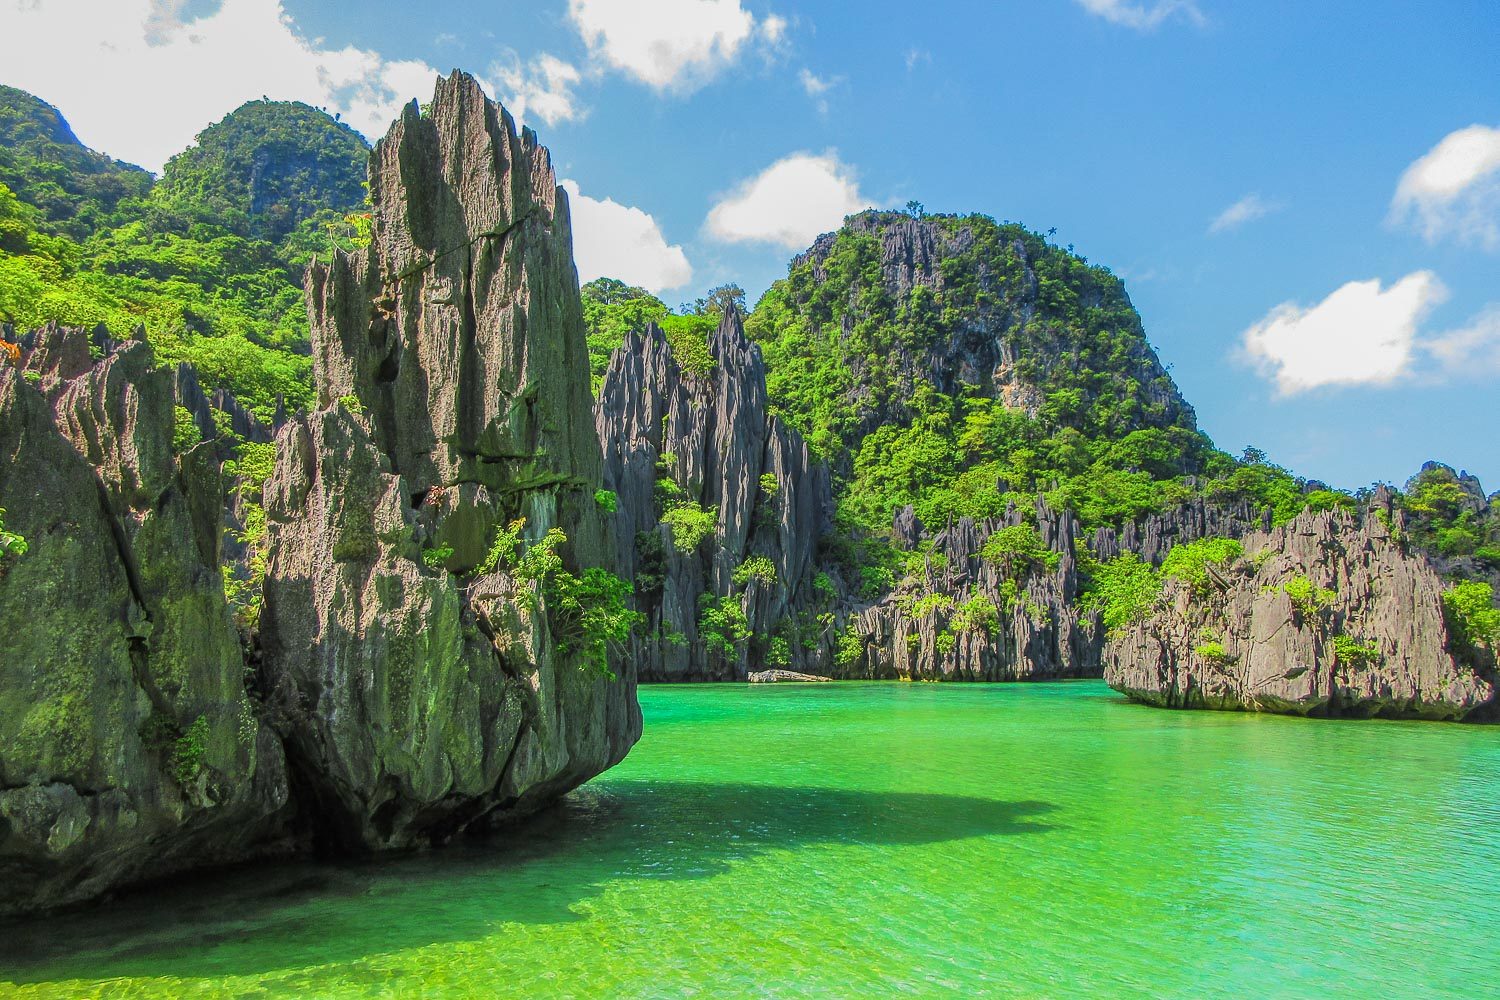 LAGOON. Cadlao Lagoon has emerald waters and towering limestone formations surrounding it. 